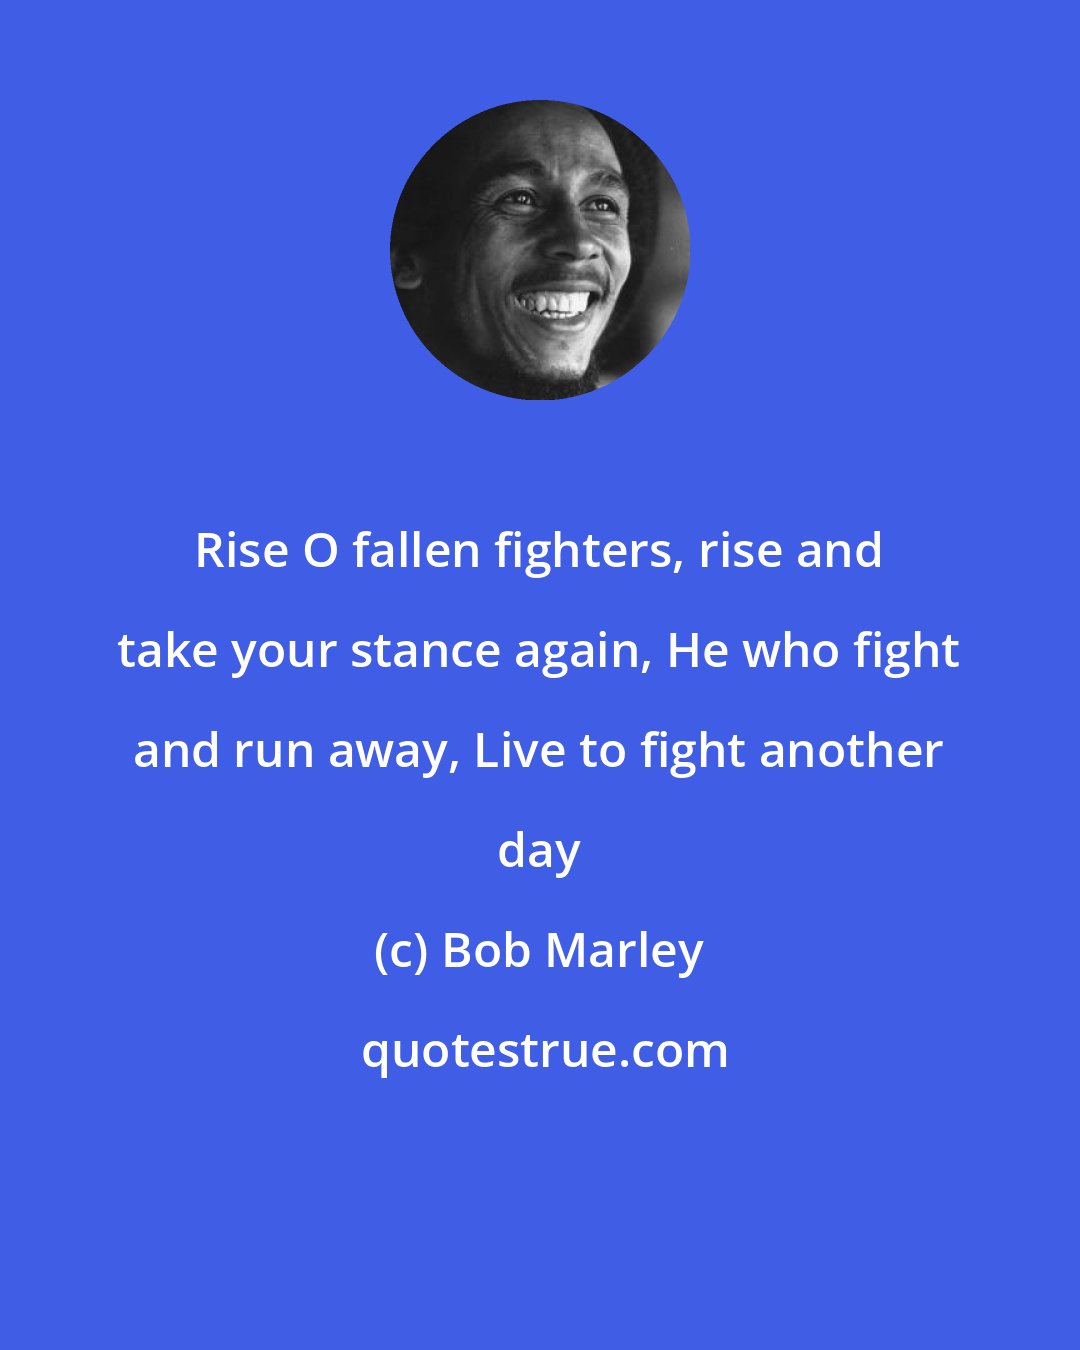 Bob Marley: Rise O fallen fighters, rise and take your stance again, He who fight and run away, Live to fight another day